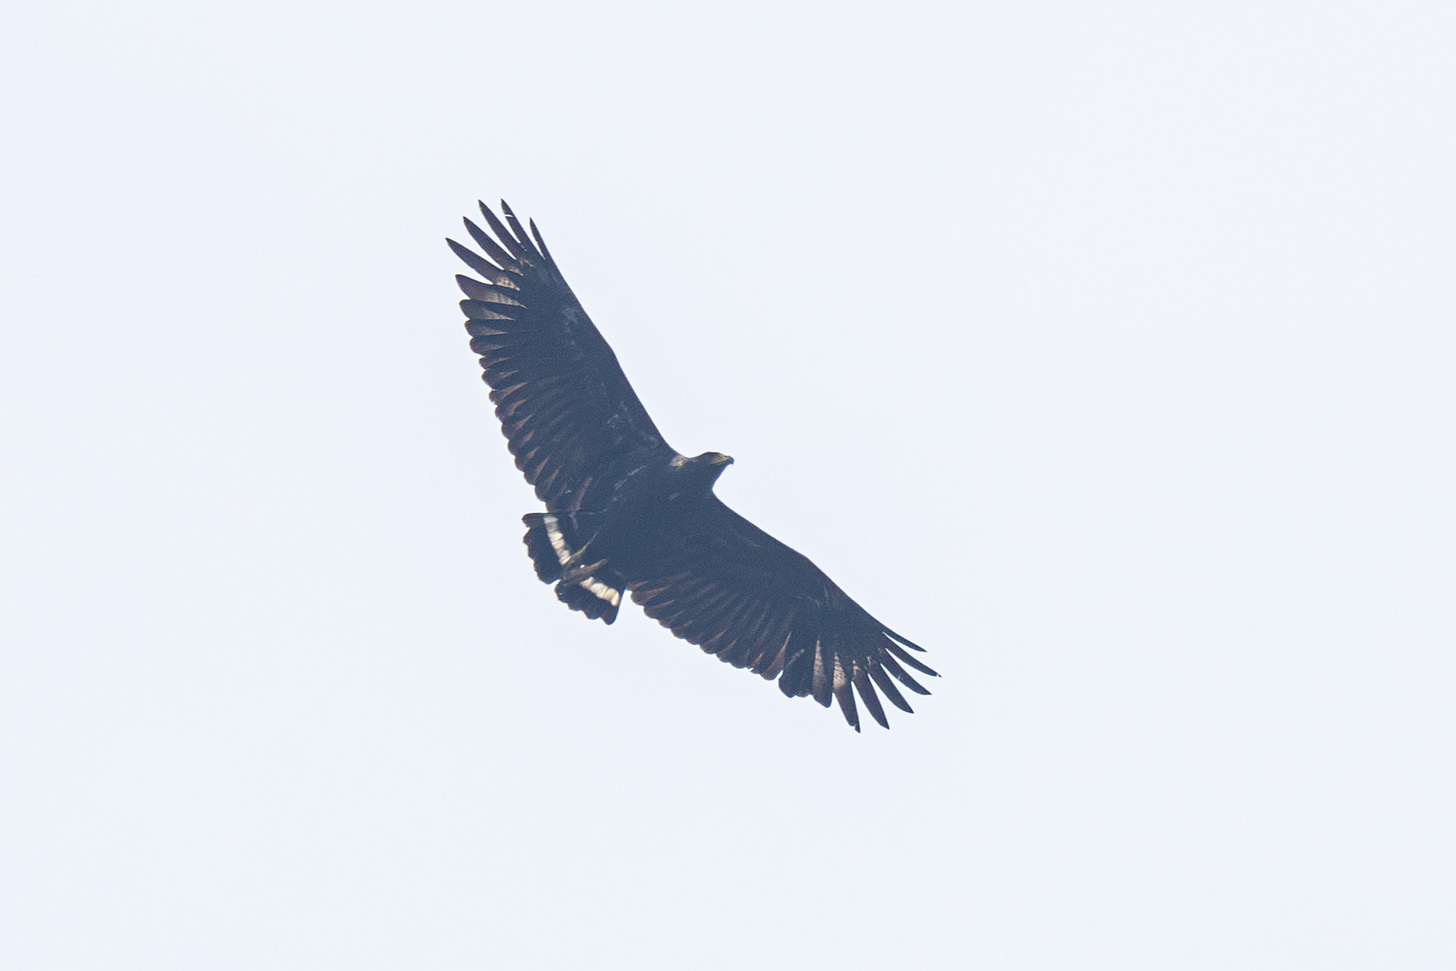 a large black eagle with a stumy white tail with a black band, flying against a white sky